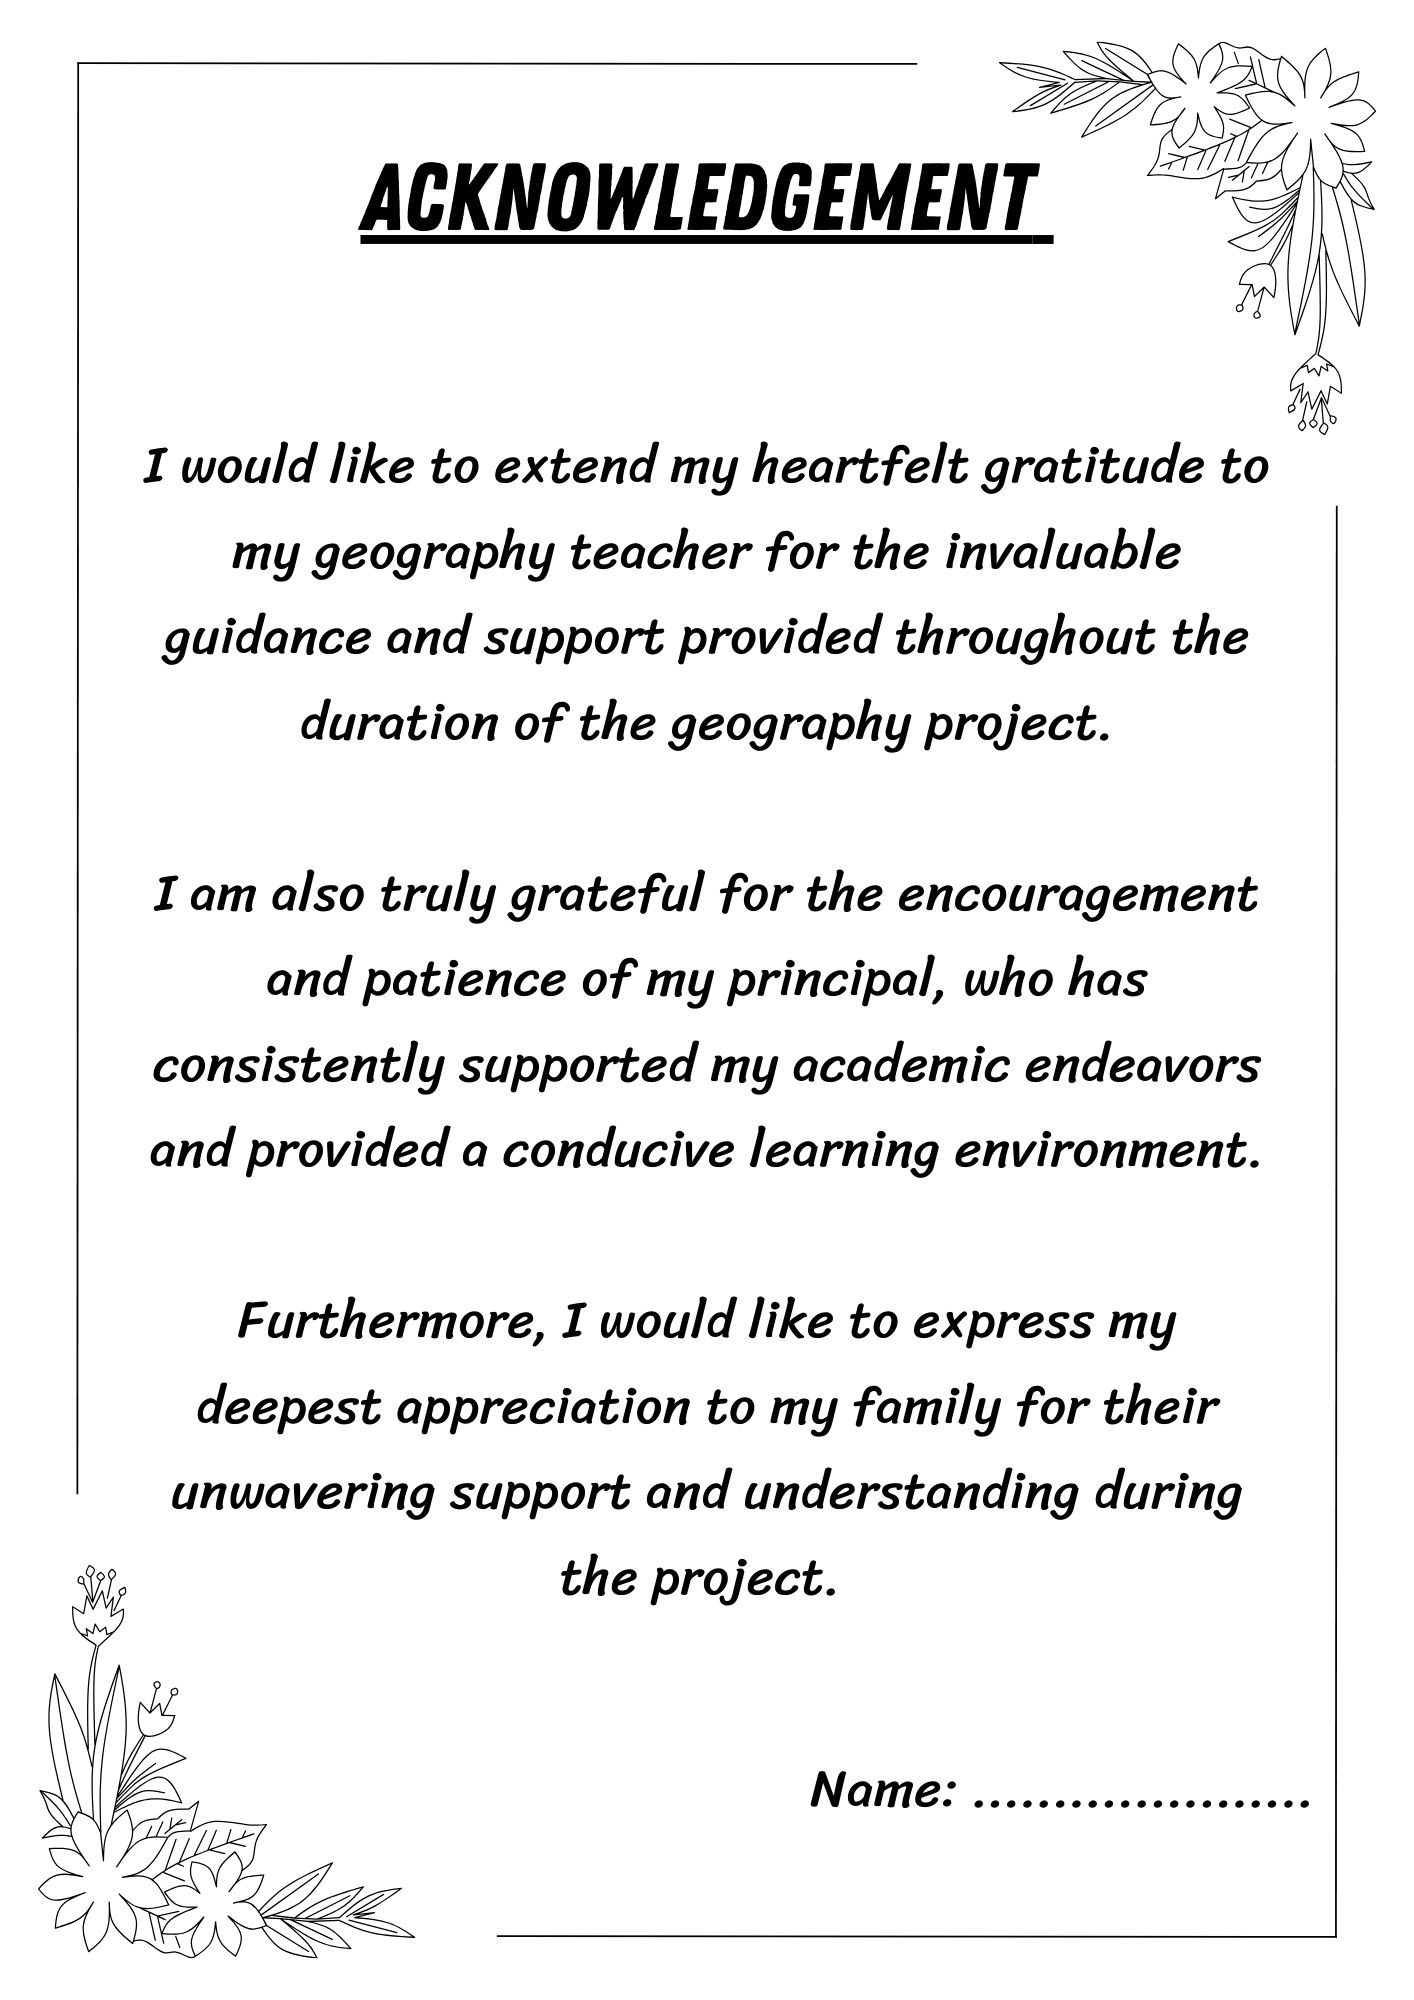 Acknowledgement for geography project